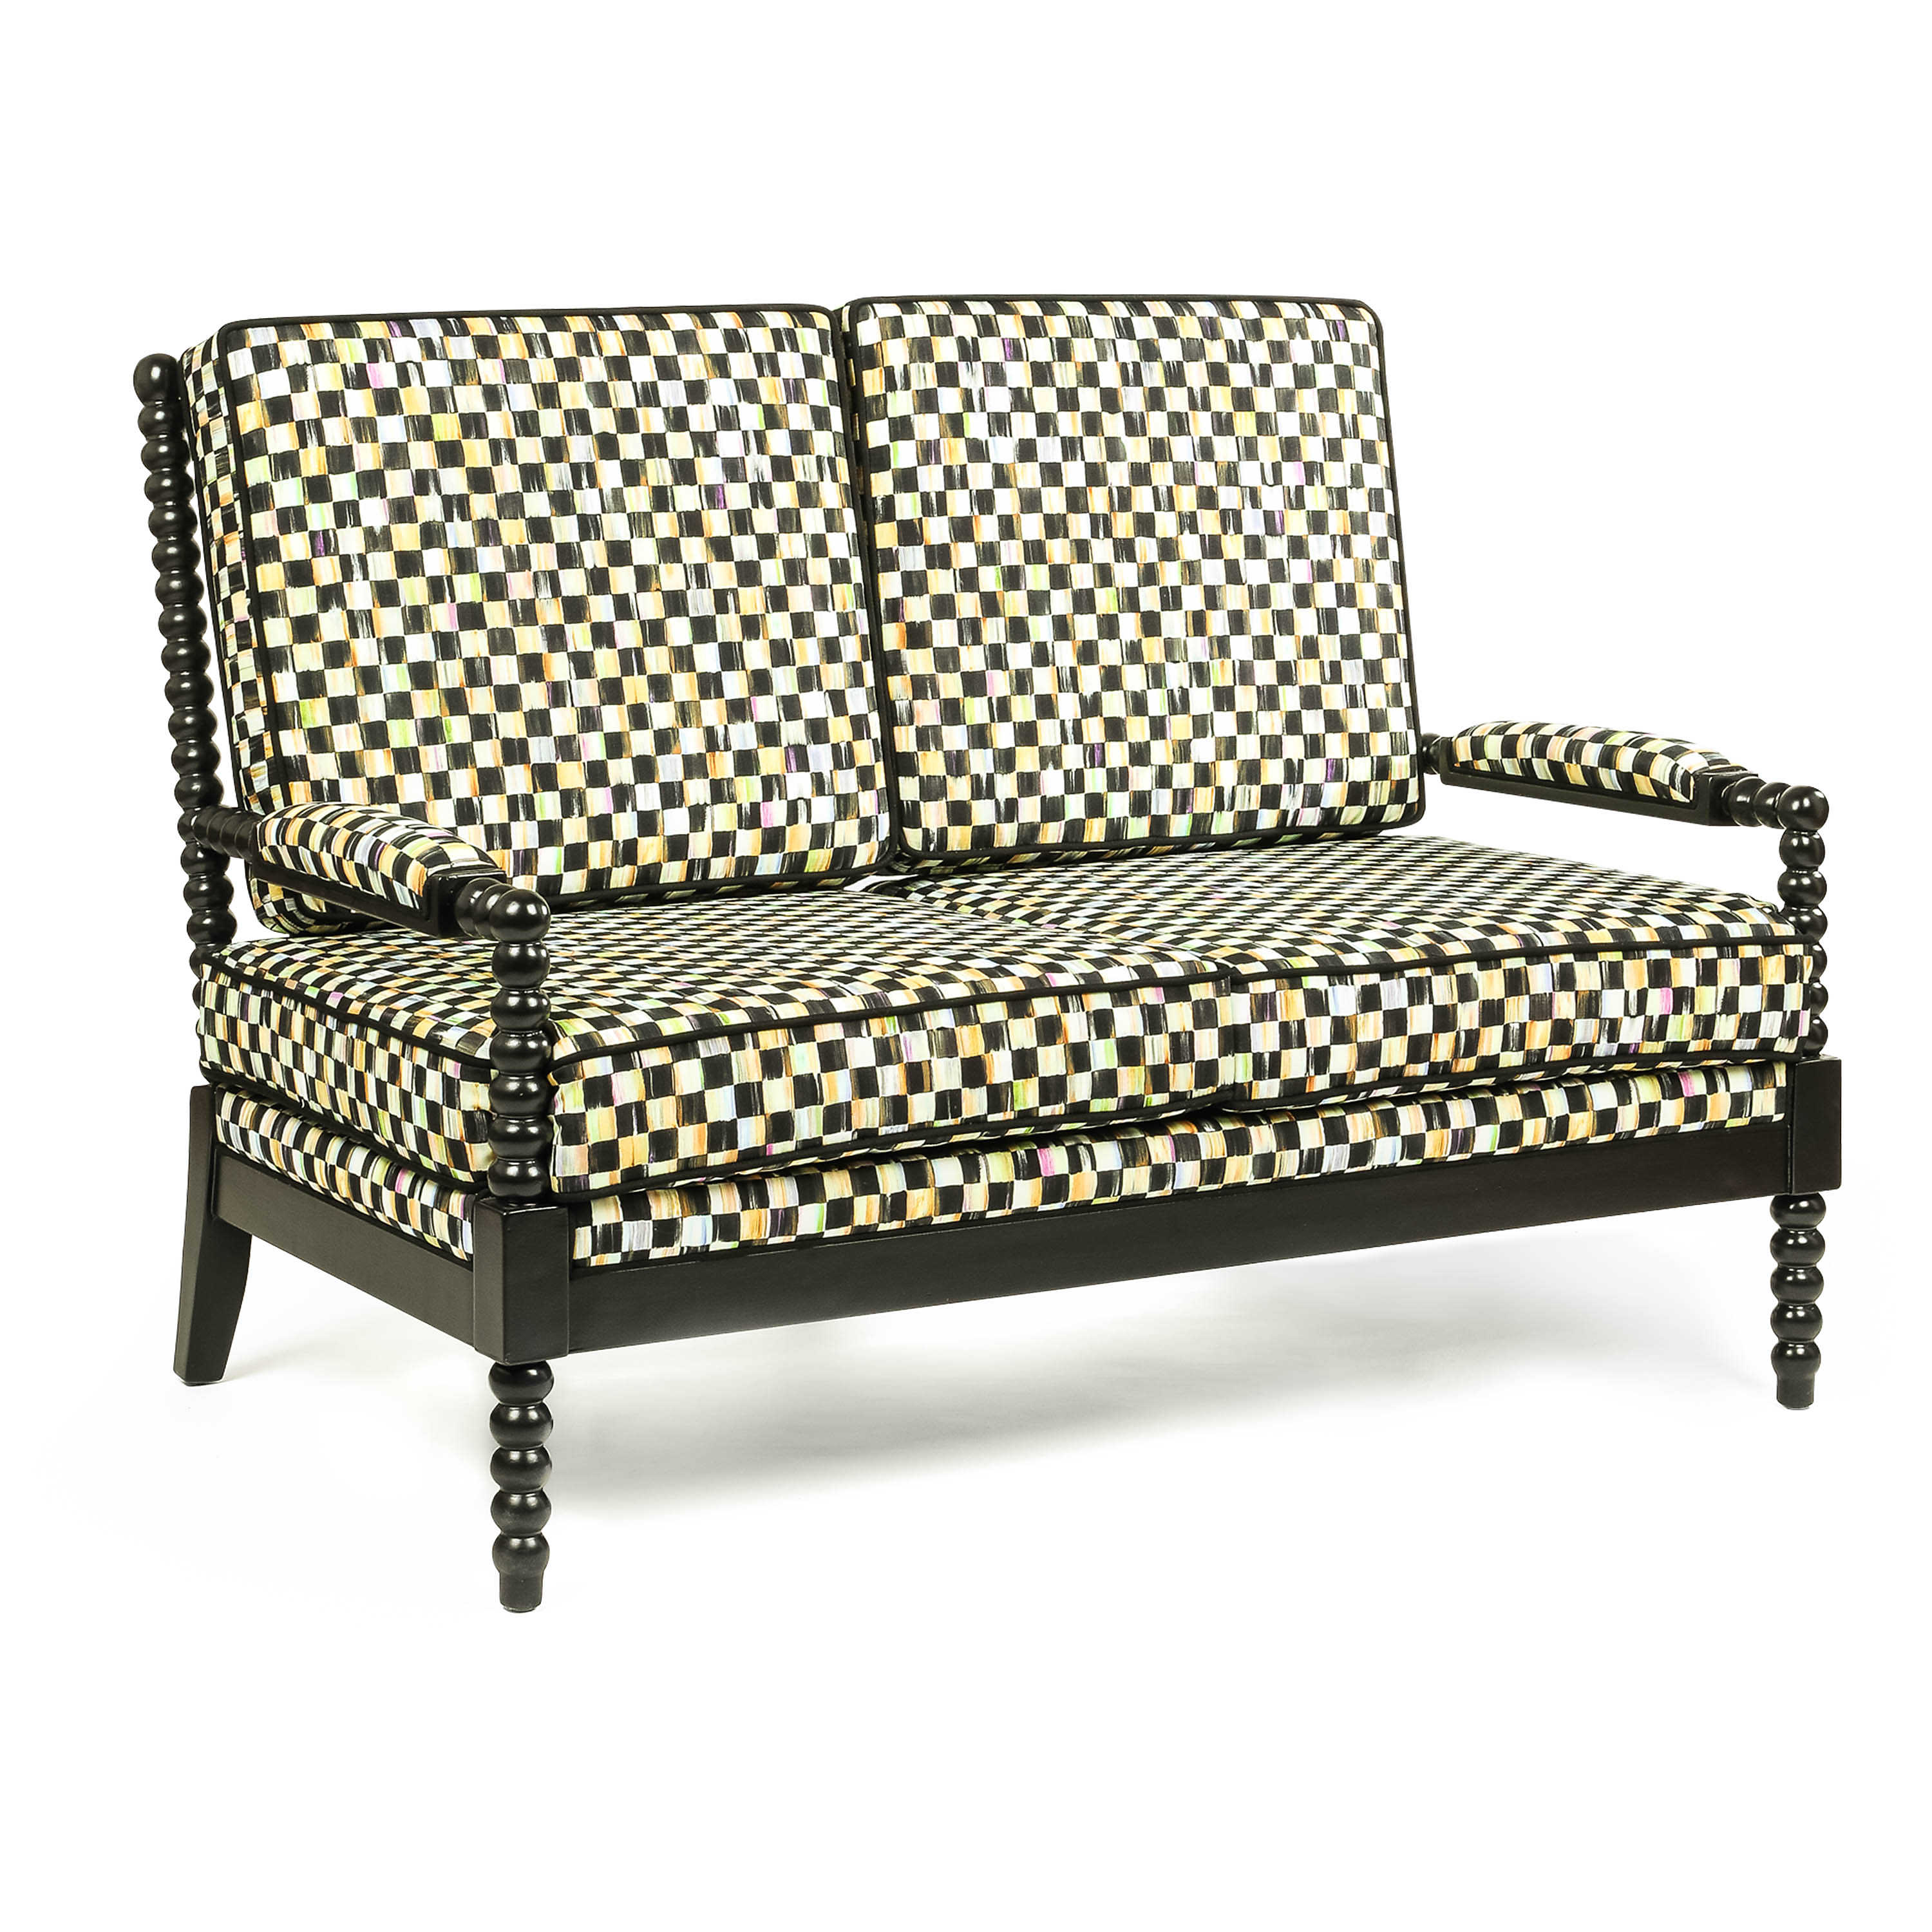 Spindle Check Outdoor Loveseat mackenzie-childs Panama 1